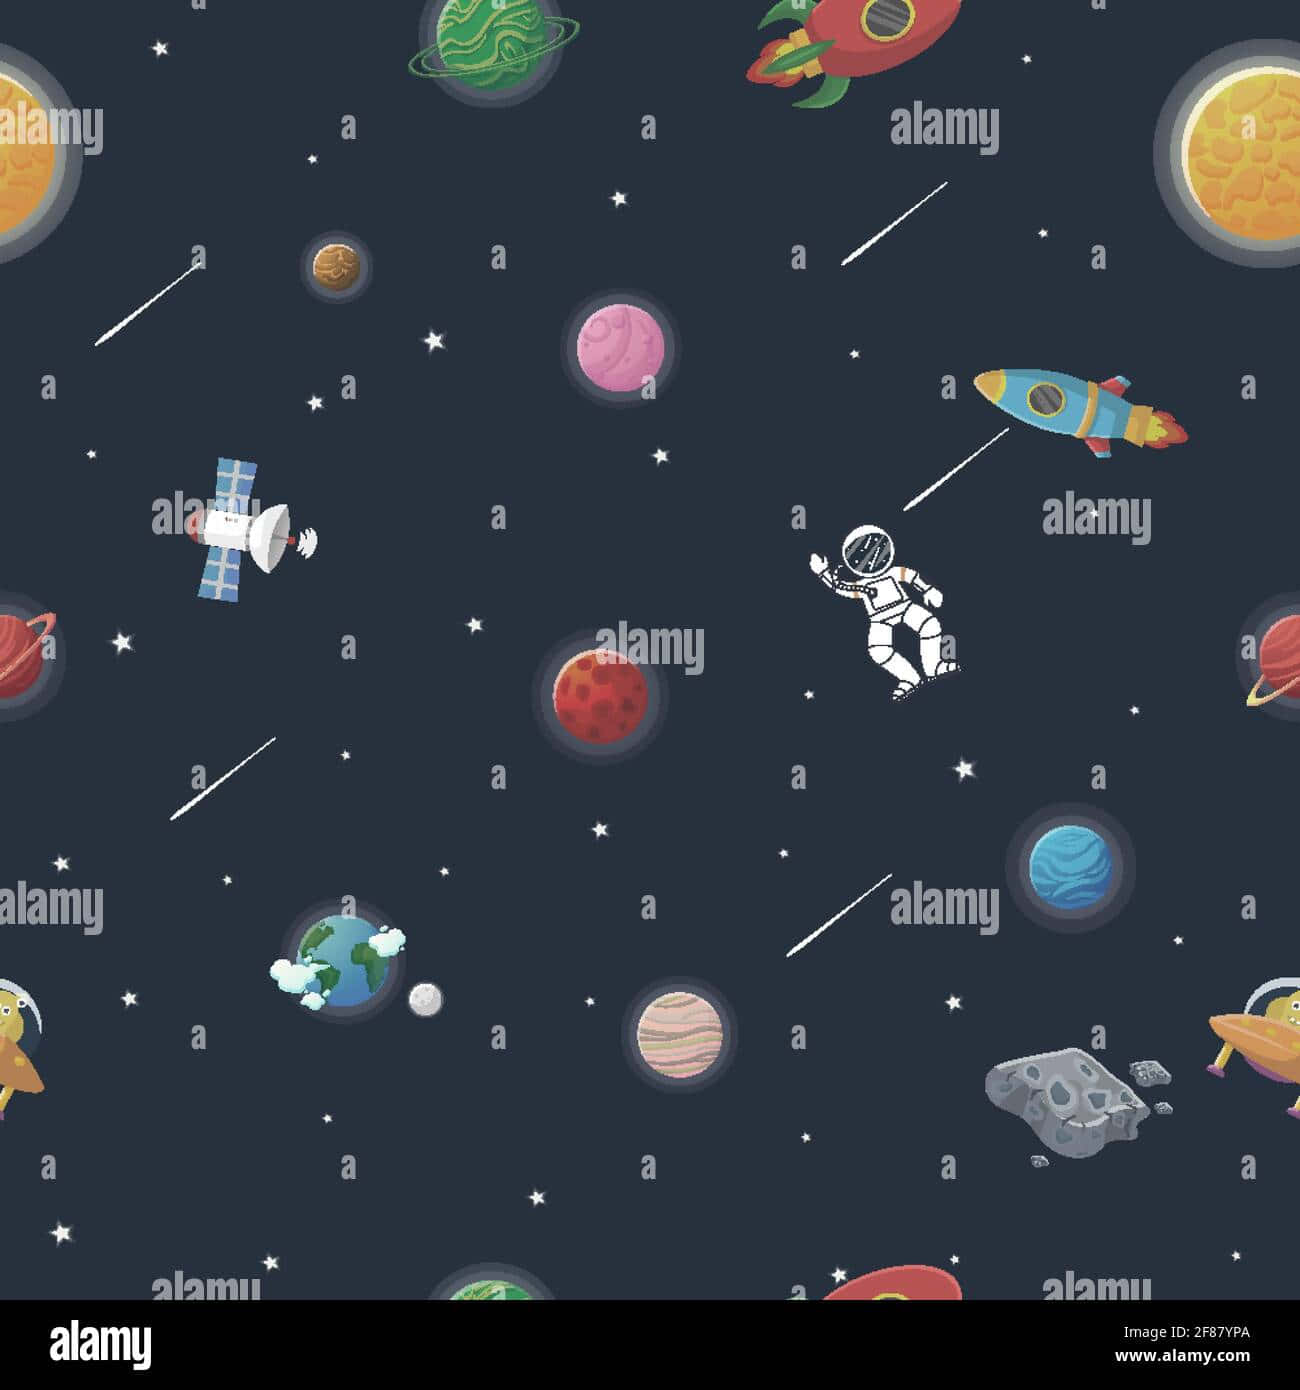 Explore the beauty of space in animated form Wallpaper